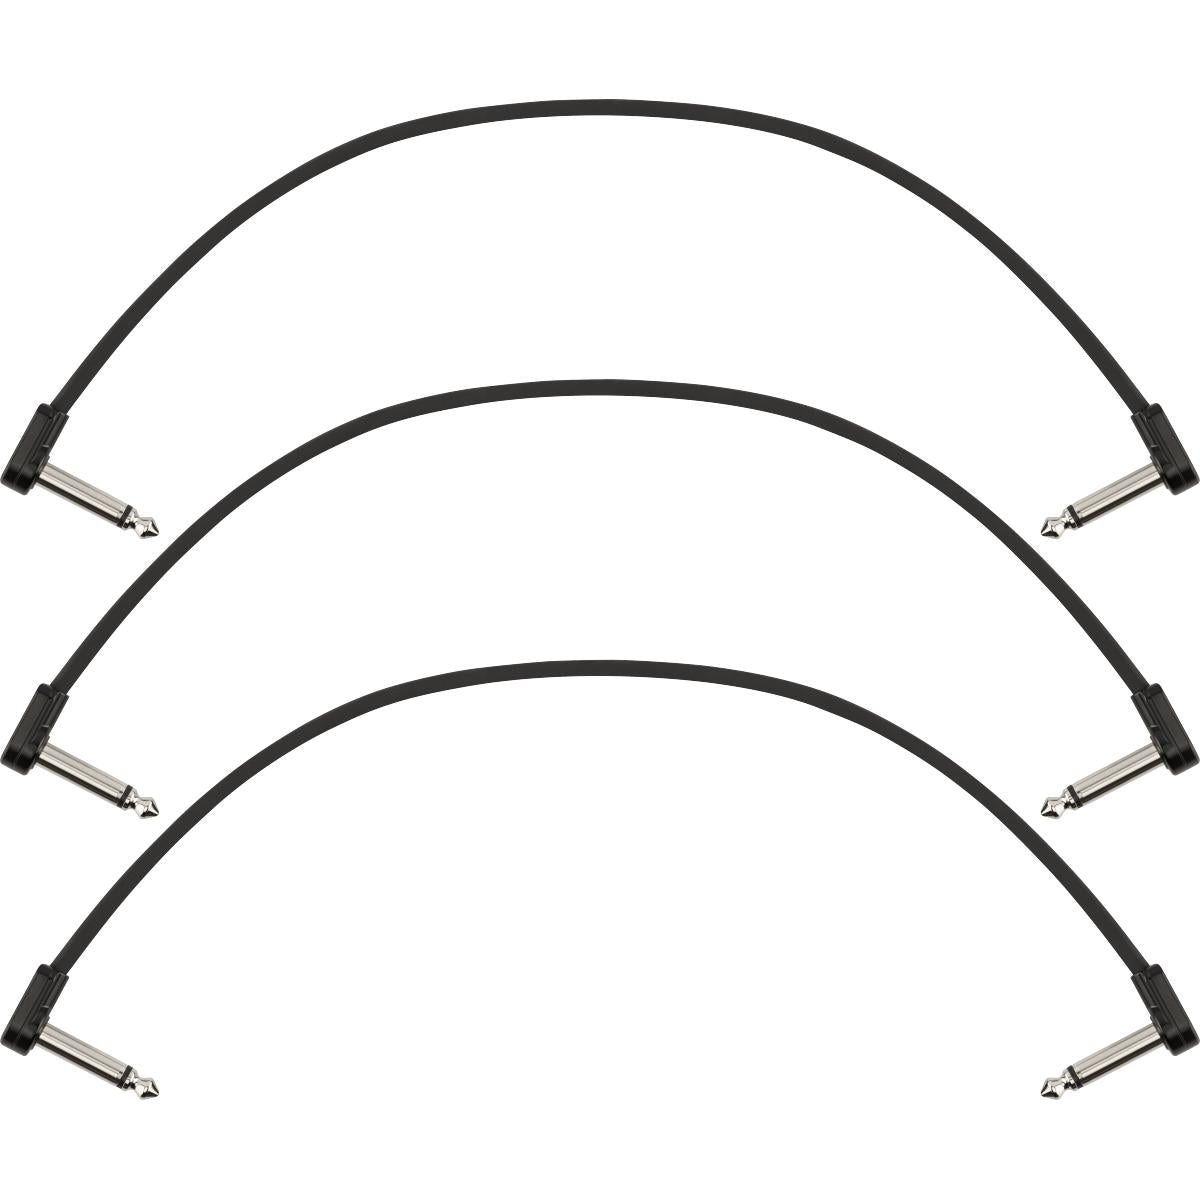 Fender Blockchain 12inch Patch Cable 3-pack Angle/Angle - 0990825010